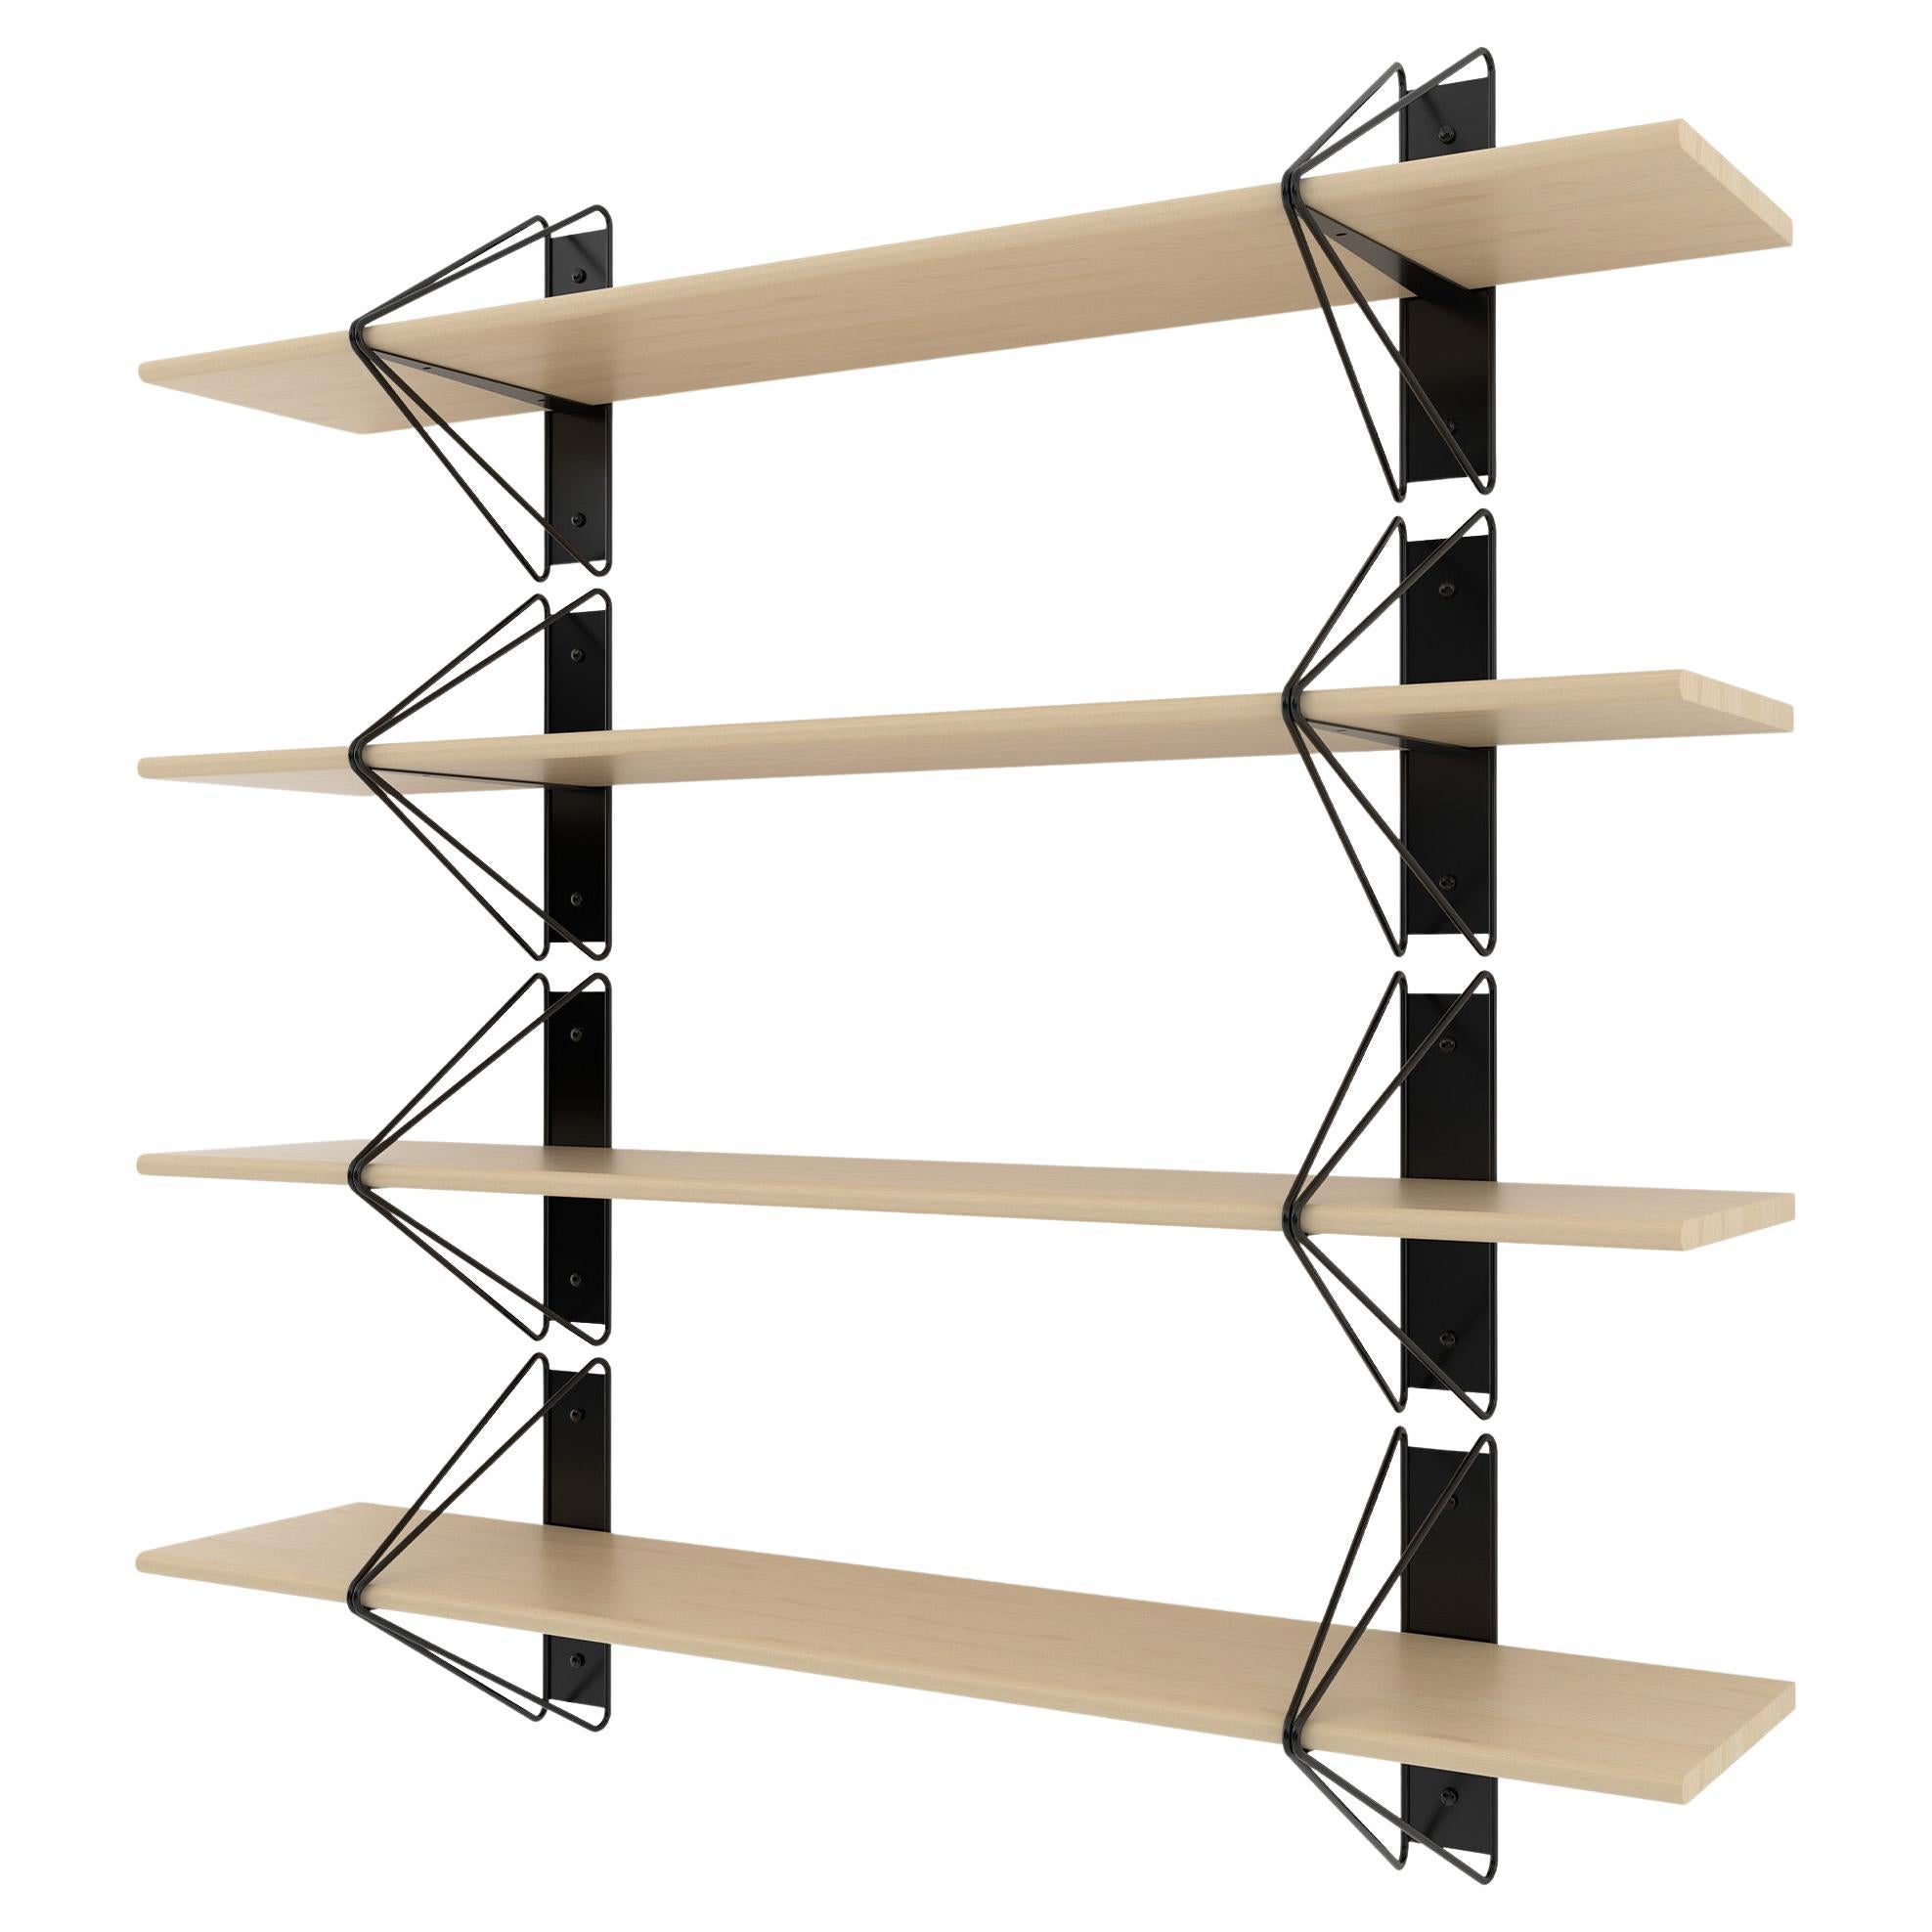 Set of 4 Strut Shelves from Souda, 52in, Black and Maple, Made to Order